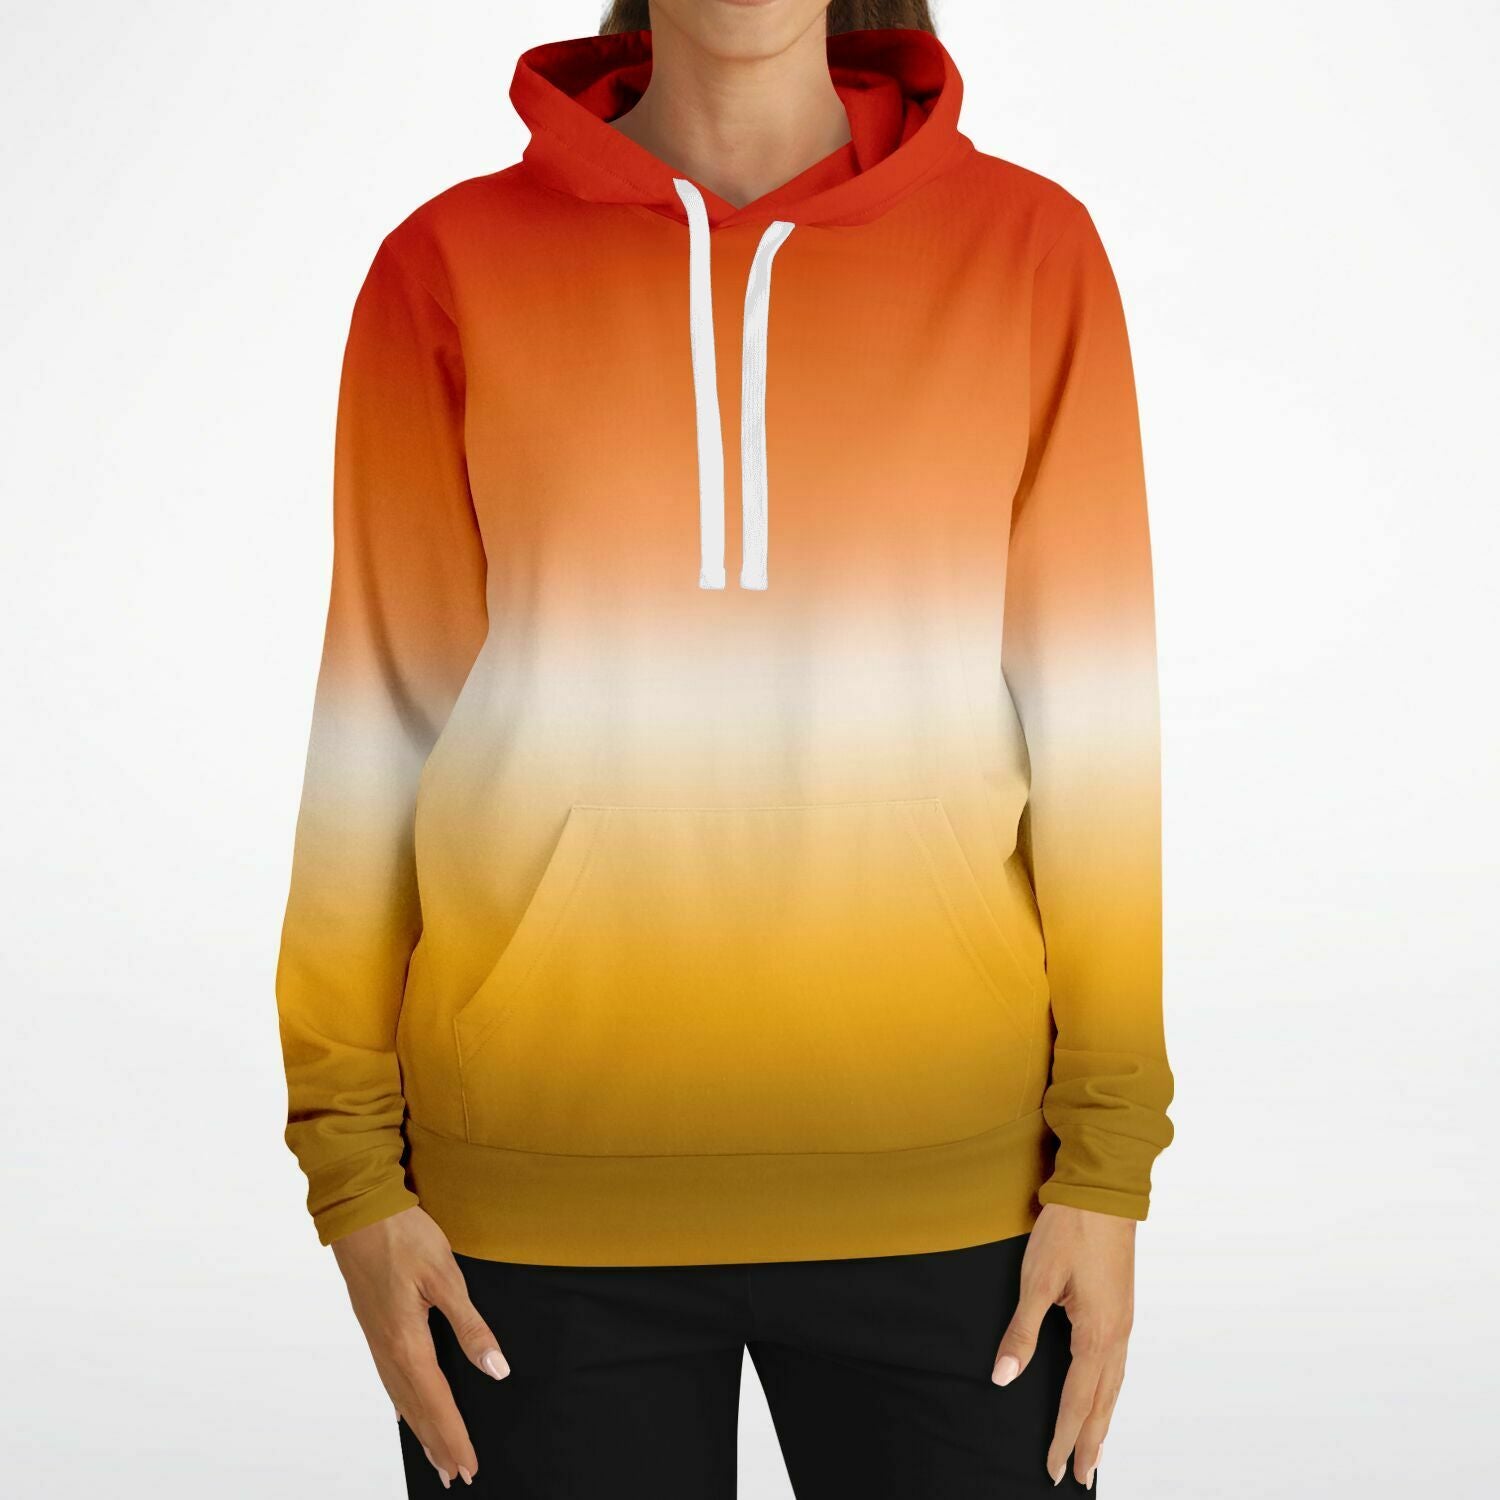 Butch Lesbian Pride Ombre Pullover Hoodie